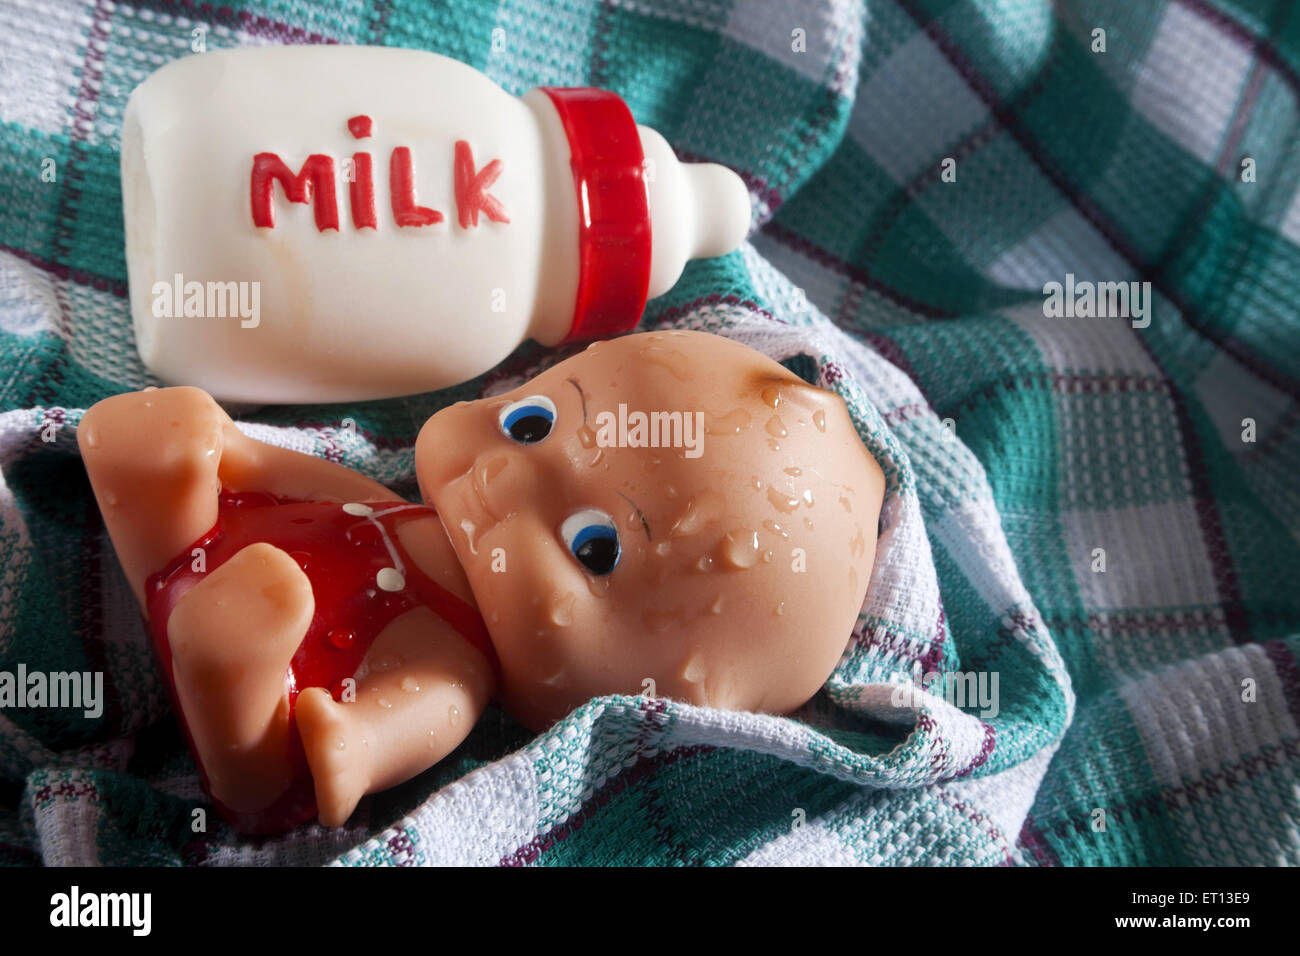 Toy Baby and Milk Bottle made from Rubber on Cotton fabric Towel India Asia Sept 2011 Stock Photo